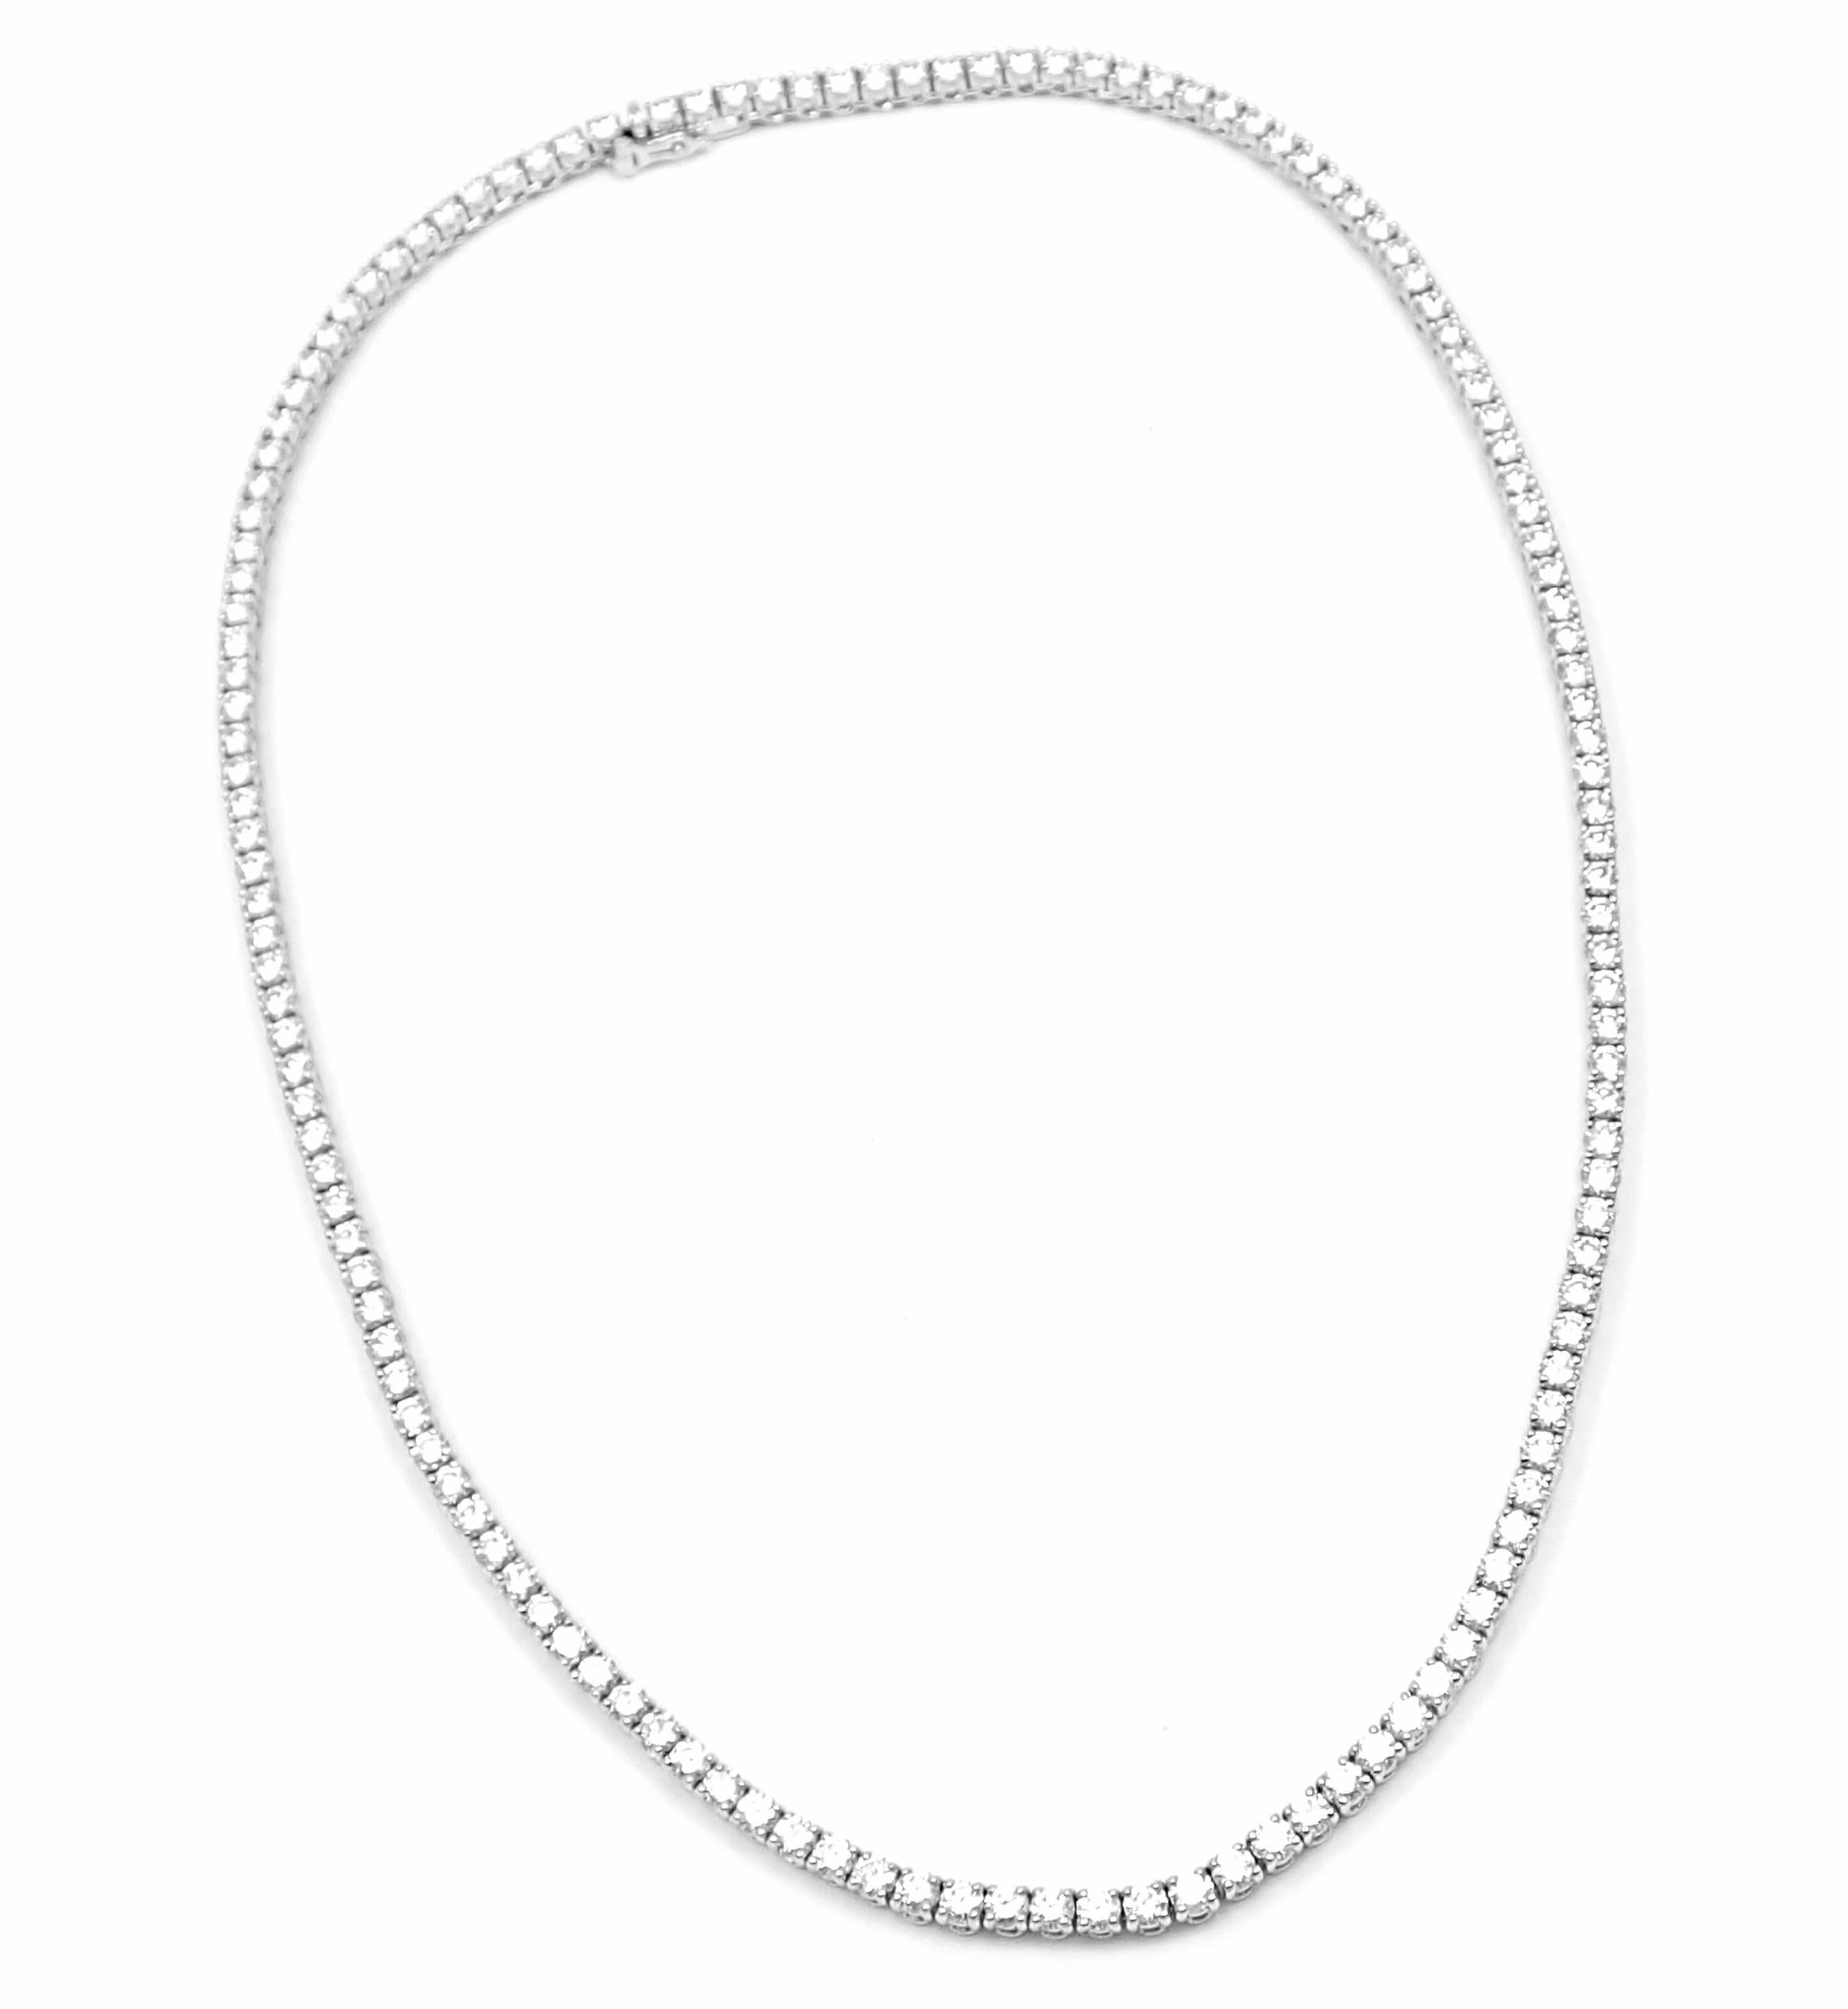 18k White Gold Diamond Line Tennis Necklace by Cartier. 
With 138 Round brilliant cut diamonds VVS1 clarity E color Total Diamond Weight approx. 9.66ct
This necklace comes with an original Cartier box and Cartier certificate.
Details: 
Chain Length: